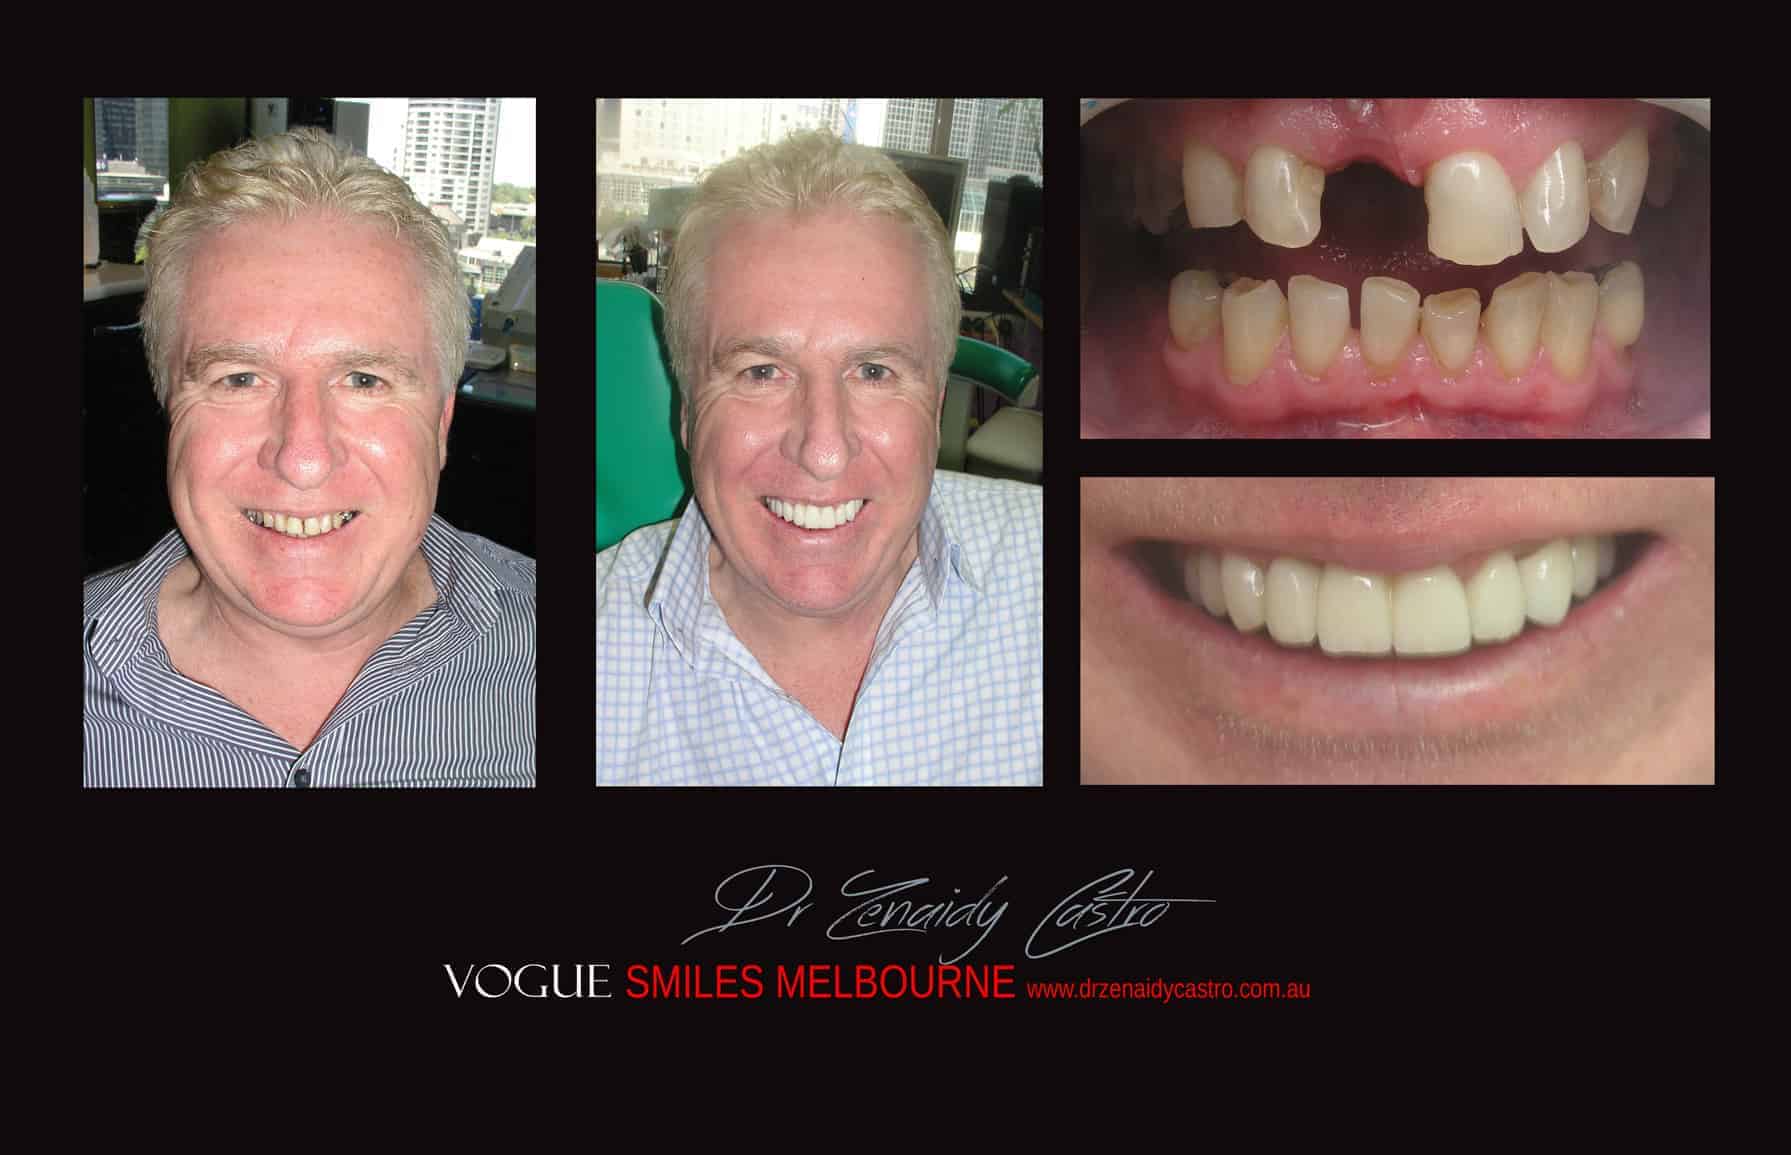 Replacing Missing teeth with Dental Bridge - Alternative options for Dental Implants, cheaper options to All-On-4 Clinic: All On 4 Dental Implants implants Melbourne Cosmetic Dentist